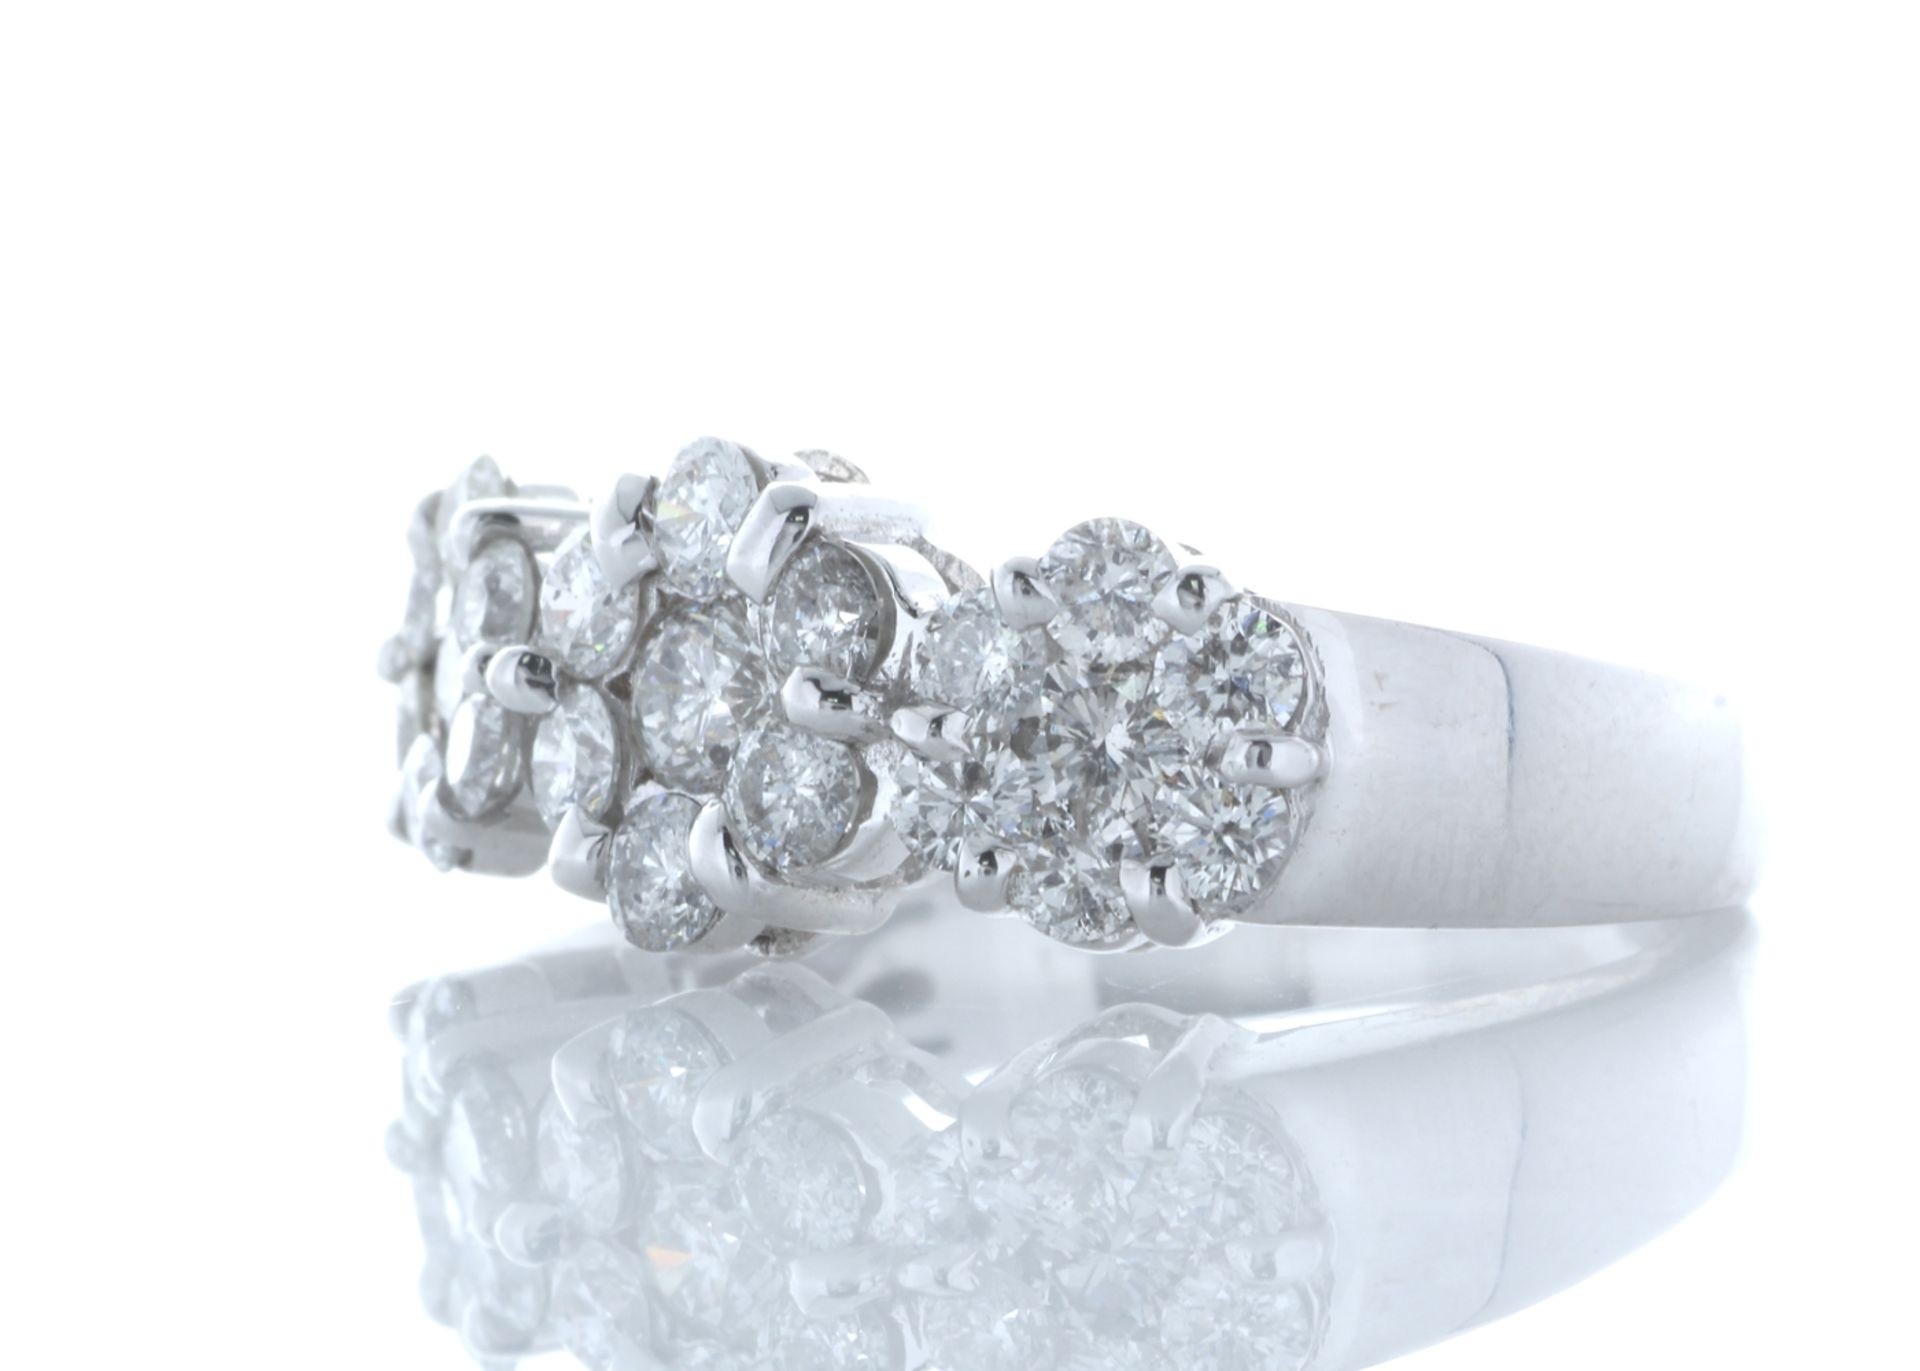 18ct White Gold Flower Cluster Diamond Ring 1.50 Carats - Image 2 of 5